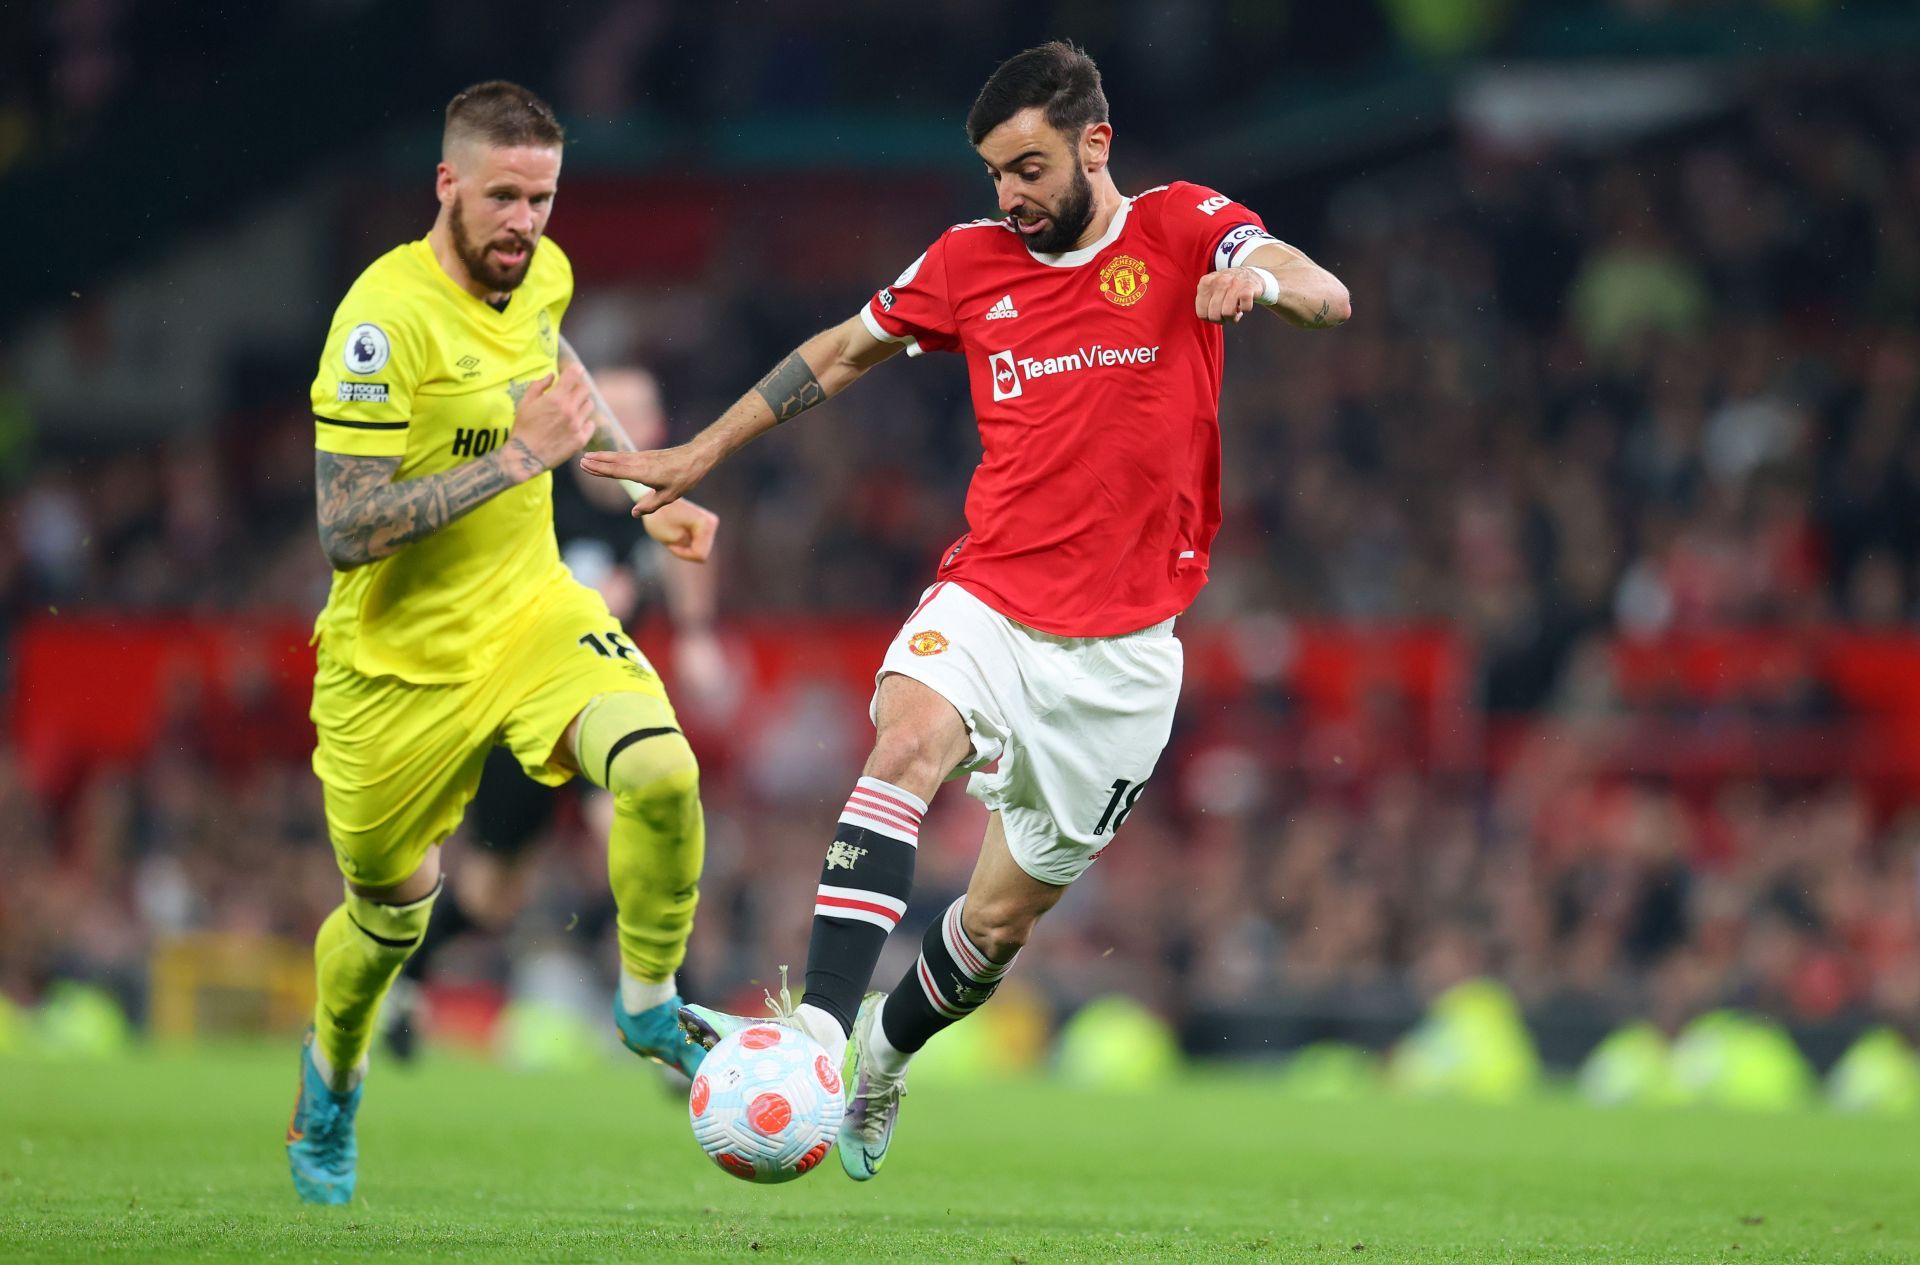 Manchester United&#039;s Bruno Fernandes (#18, R) in action at Old Trafford